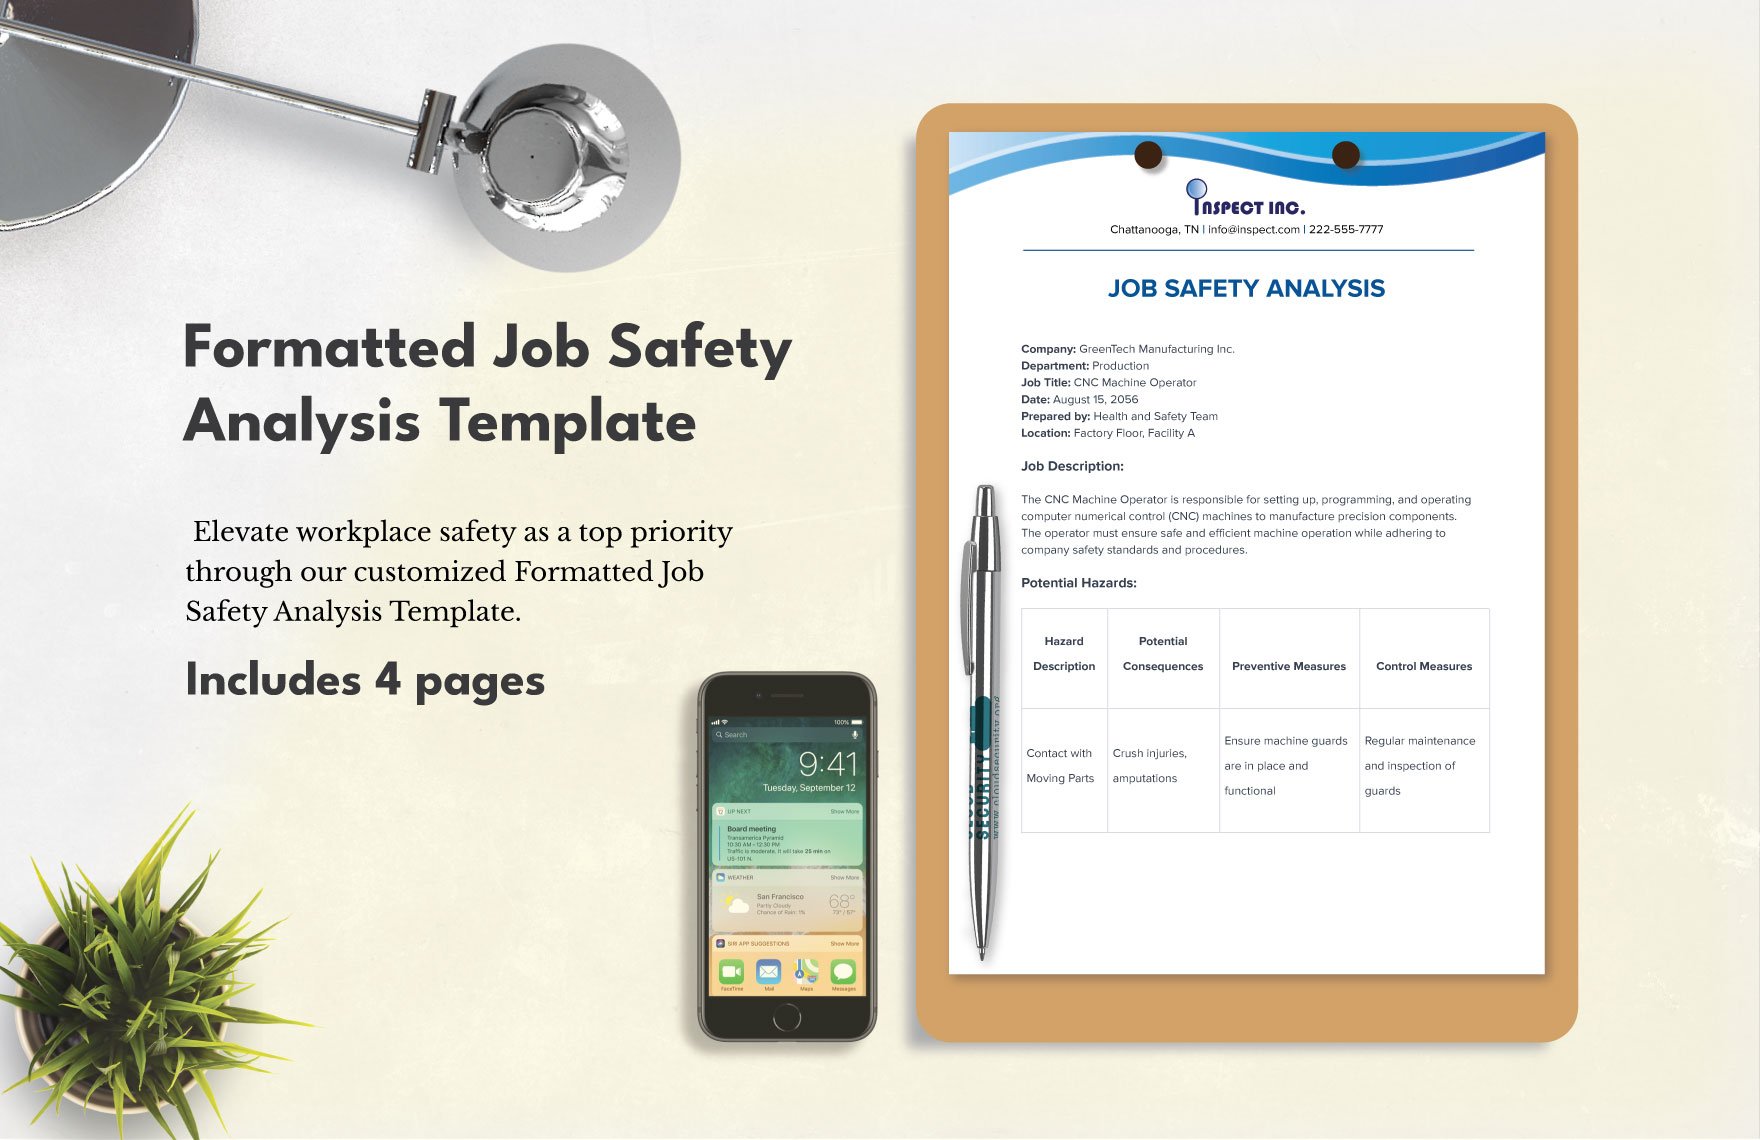 Formatted Job Safety Analysis Template